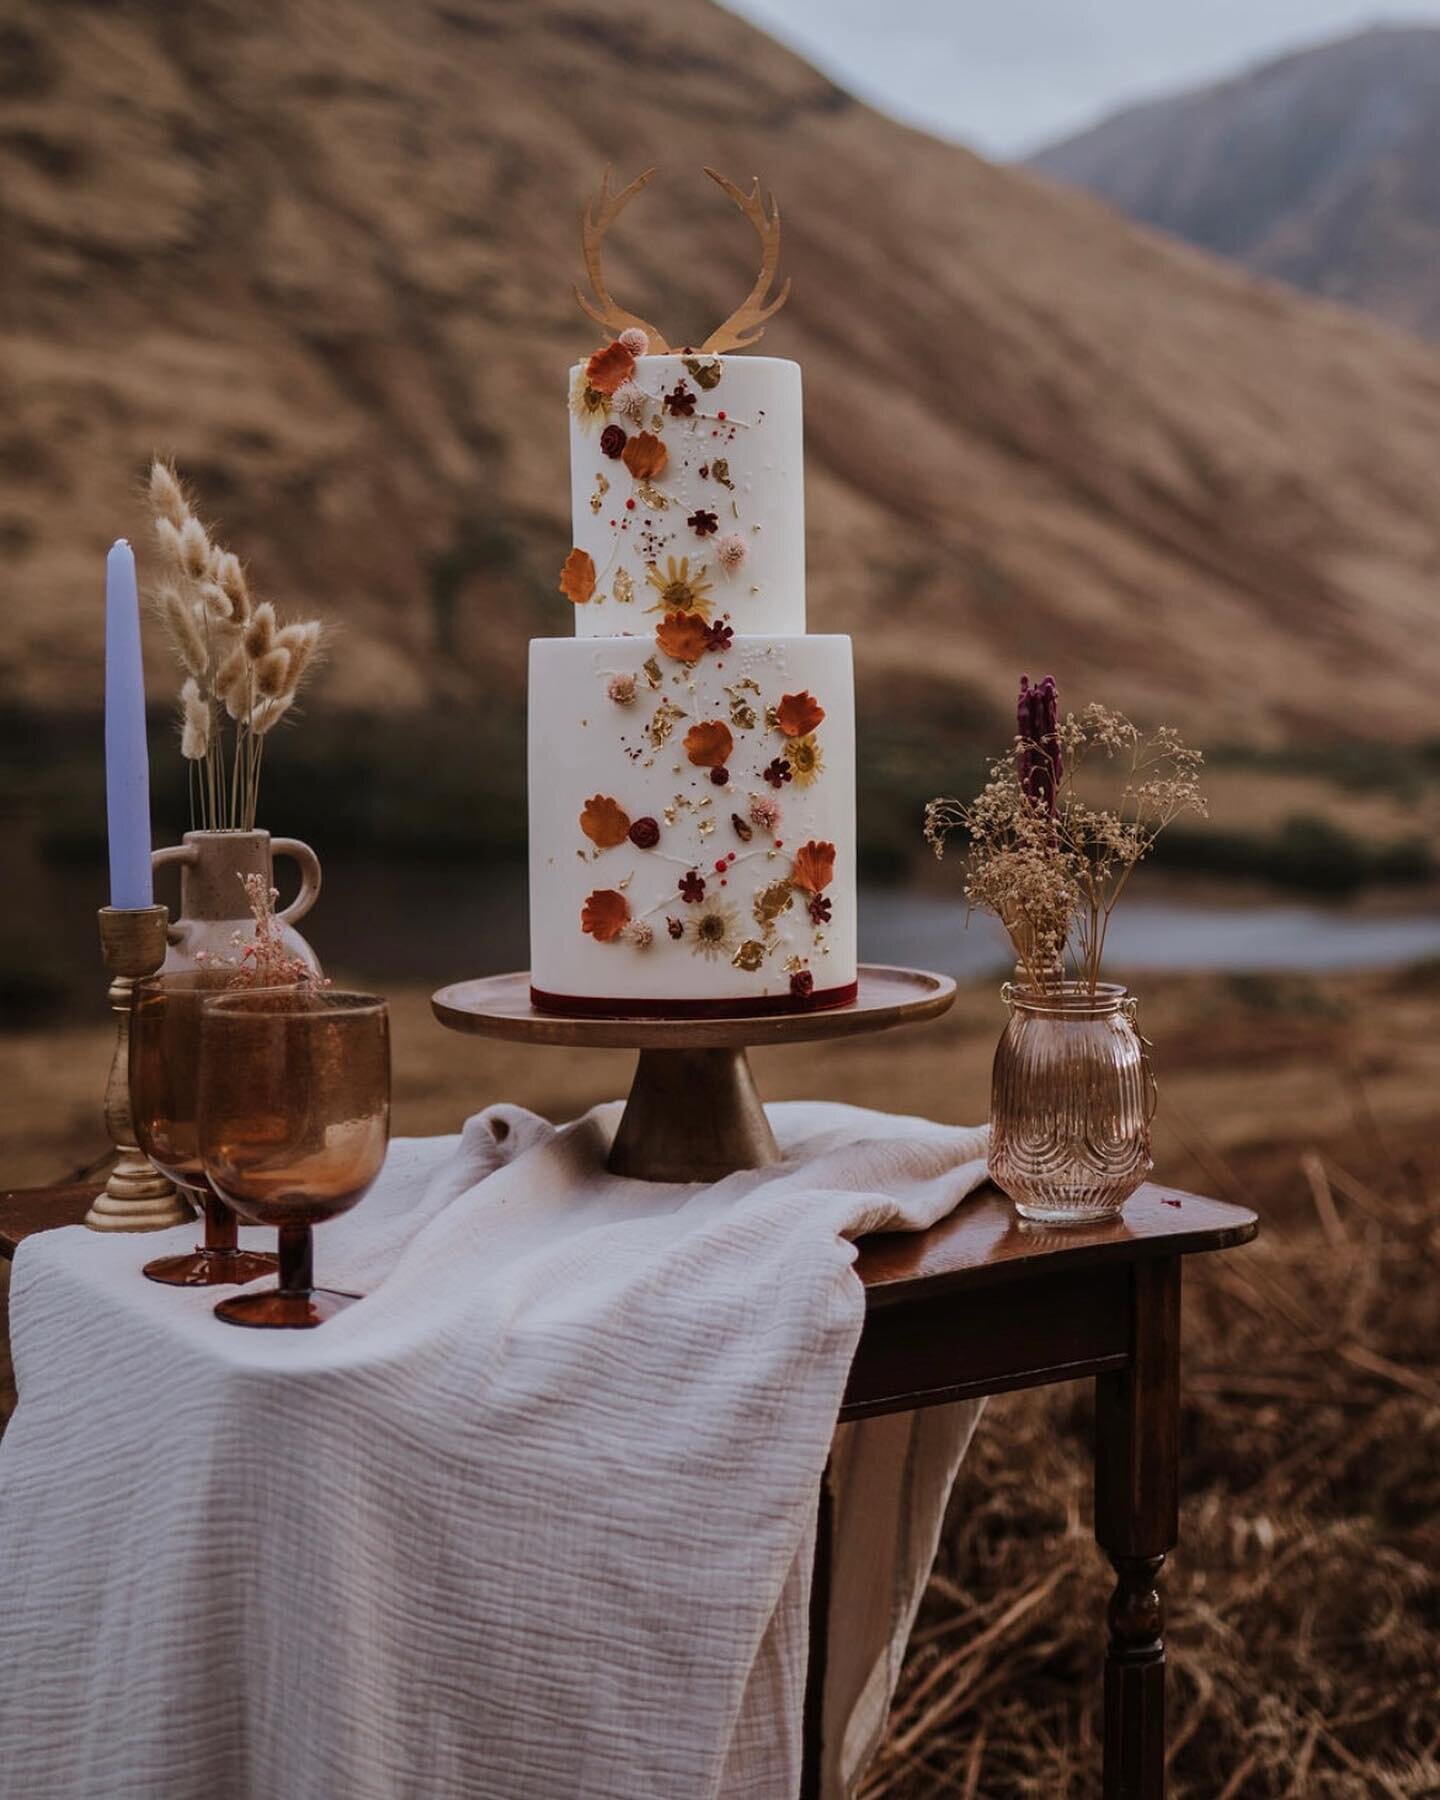 D R E A M Y styled photoshoot with the amazing @caitlinwilderphotography up in Glencoe the other week. I love a wee styled shoot! Caitlin sent me a mood board and I had a mess around with some dried edible flowers from @nurturedinnorfolk and some sug